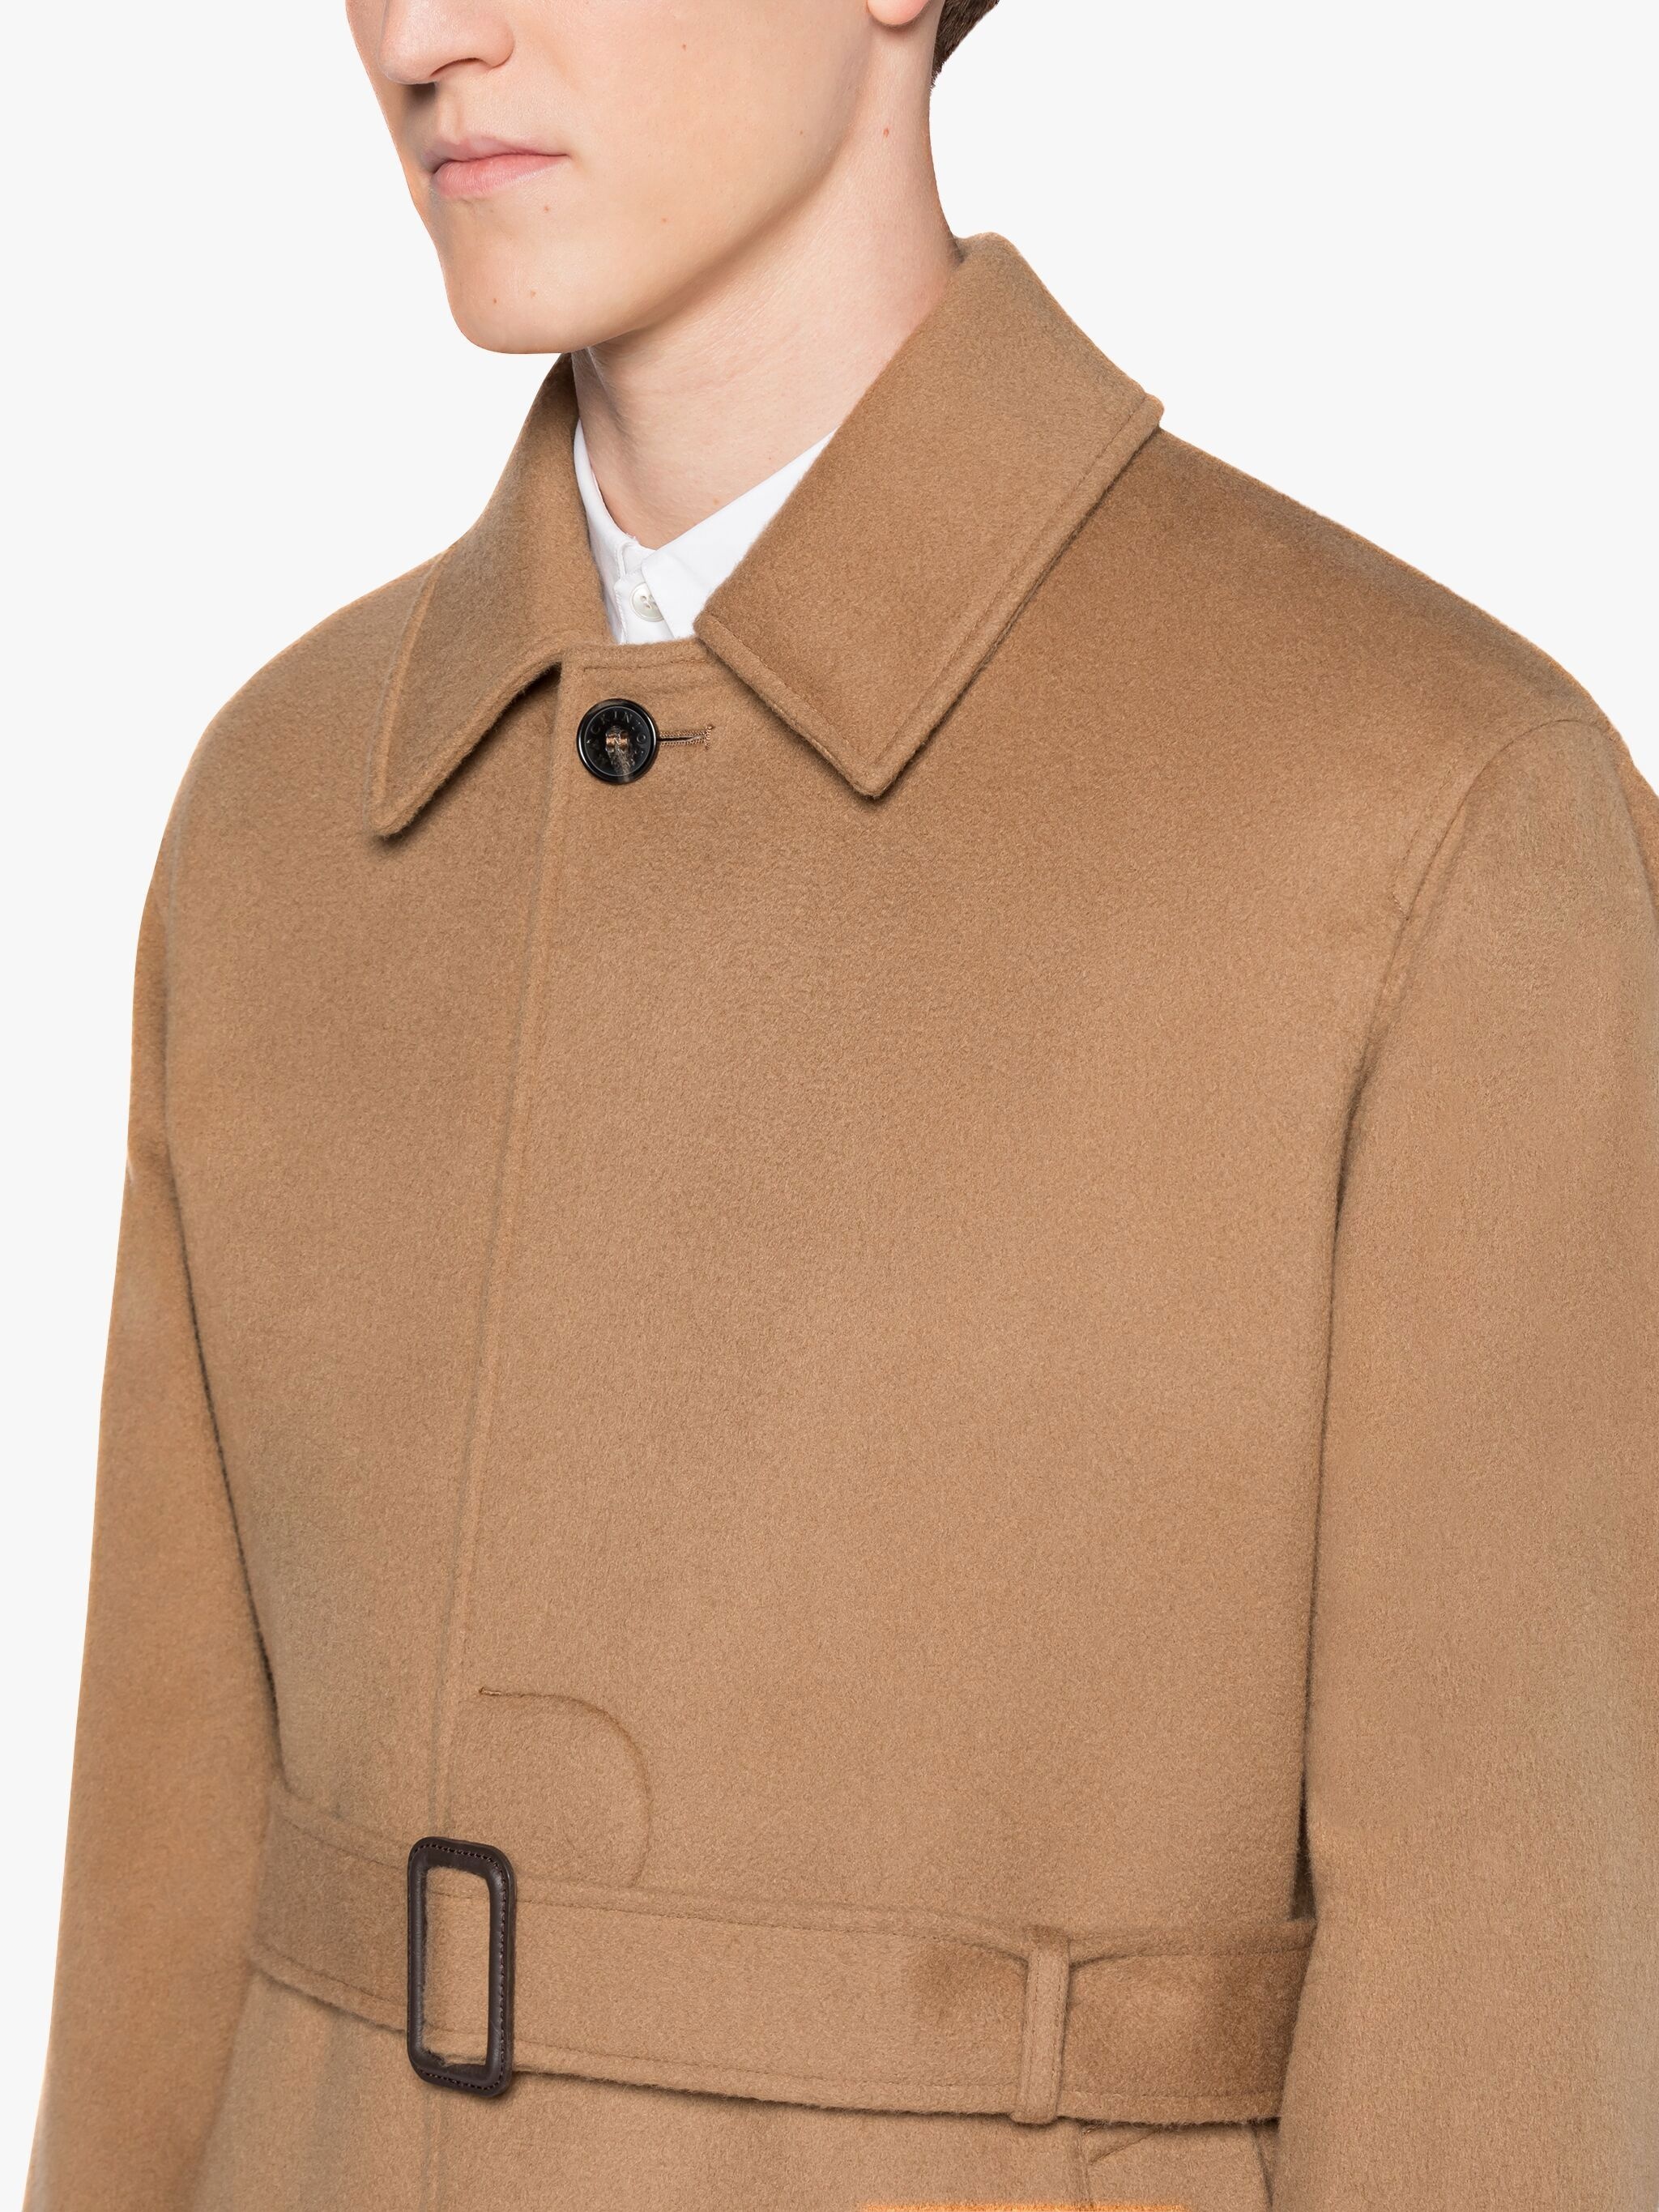 MILAN BEIGE WOOL & CASHMERE SINGLE-BREASTED TRENCH COAT - 5